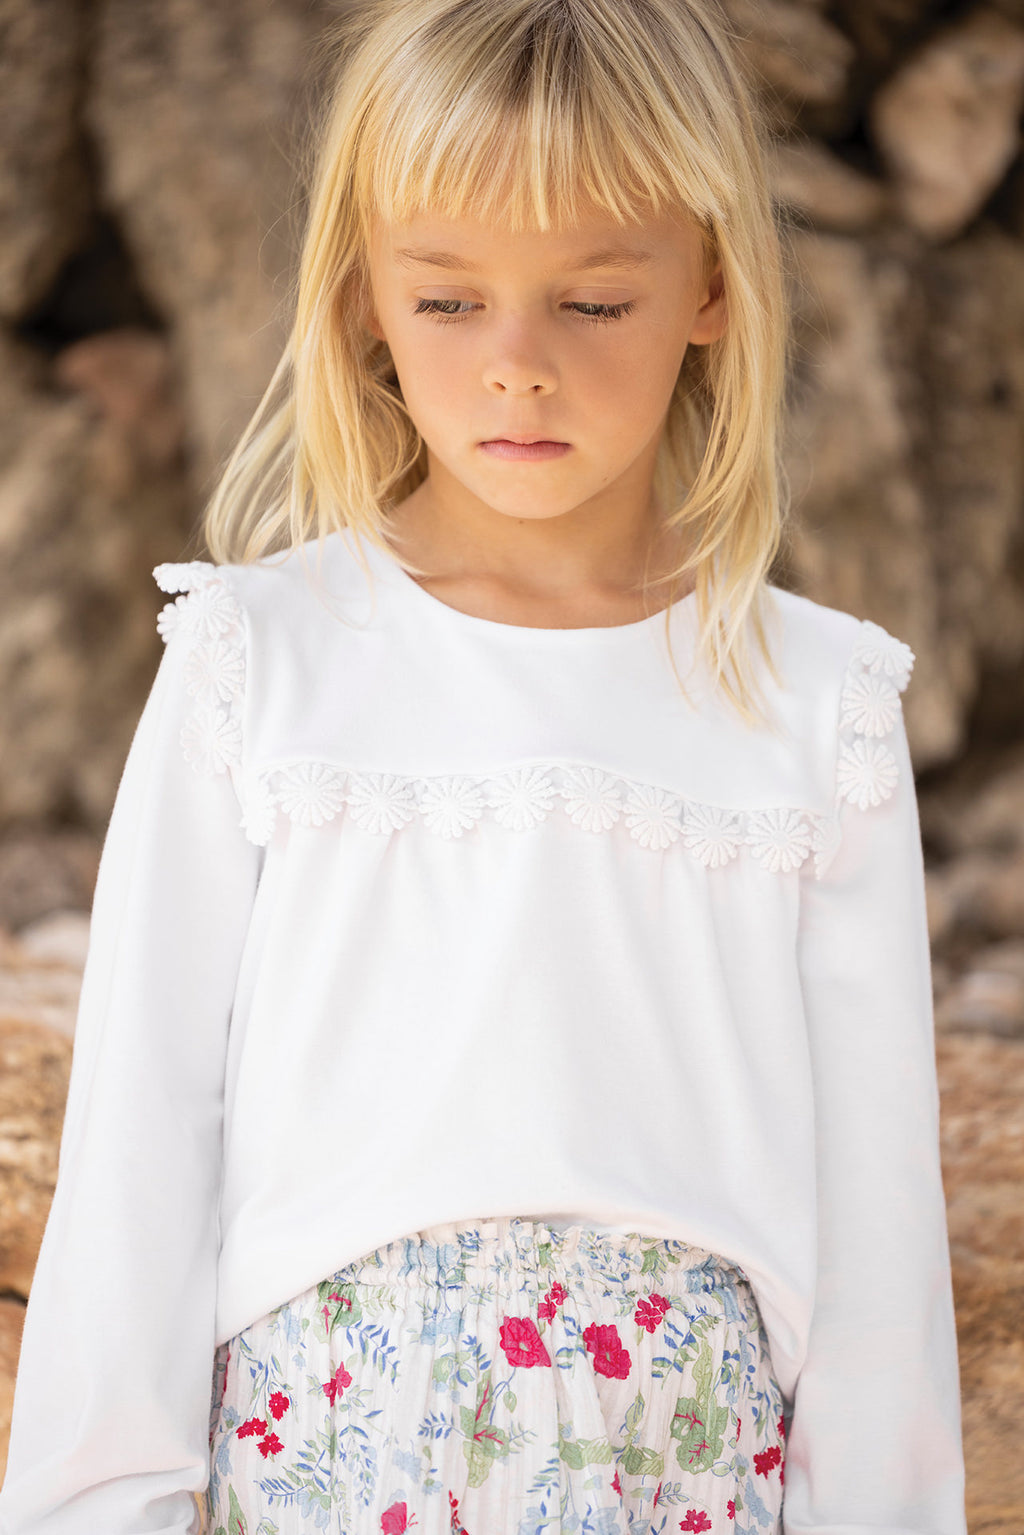 Blouse - White Marguerite embroidery